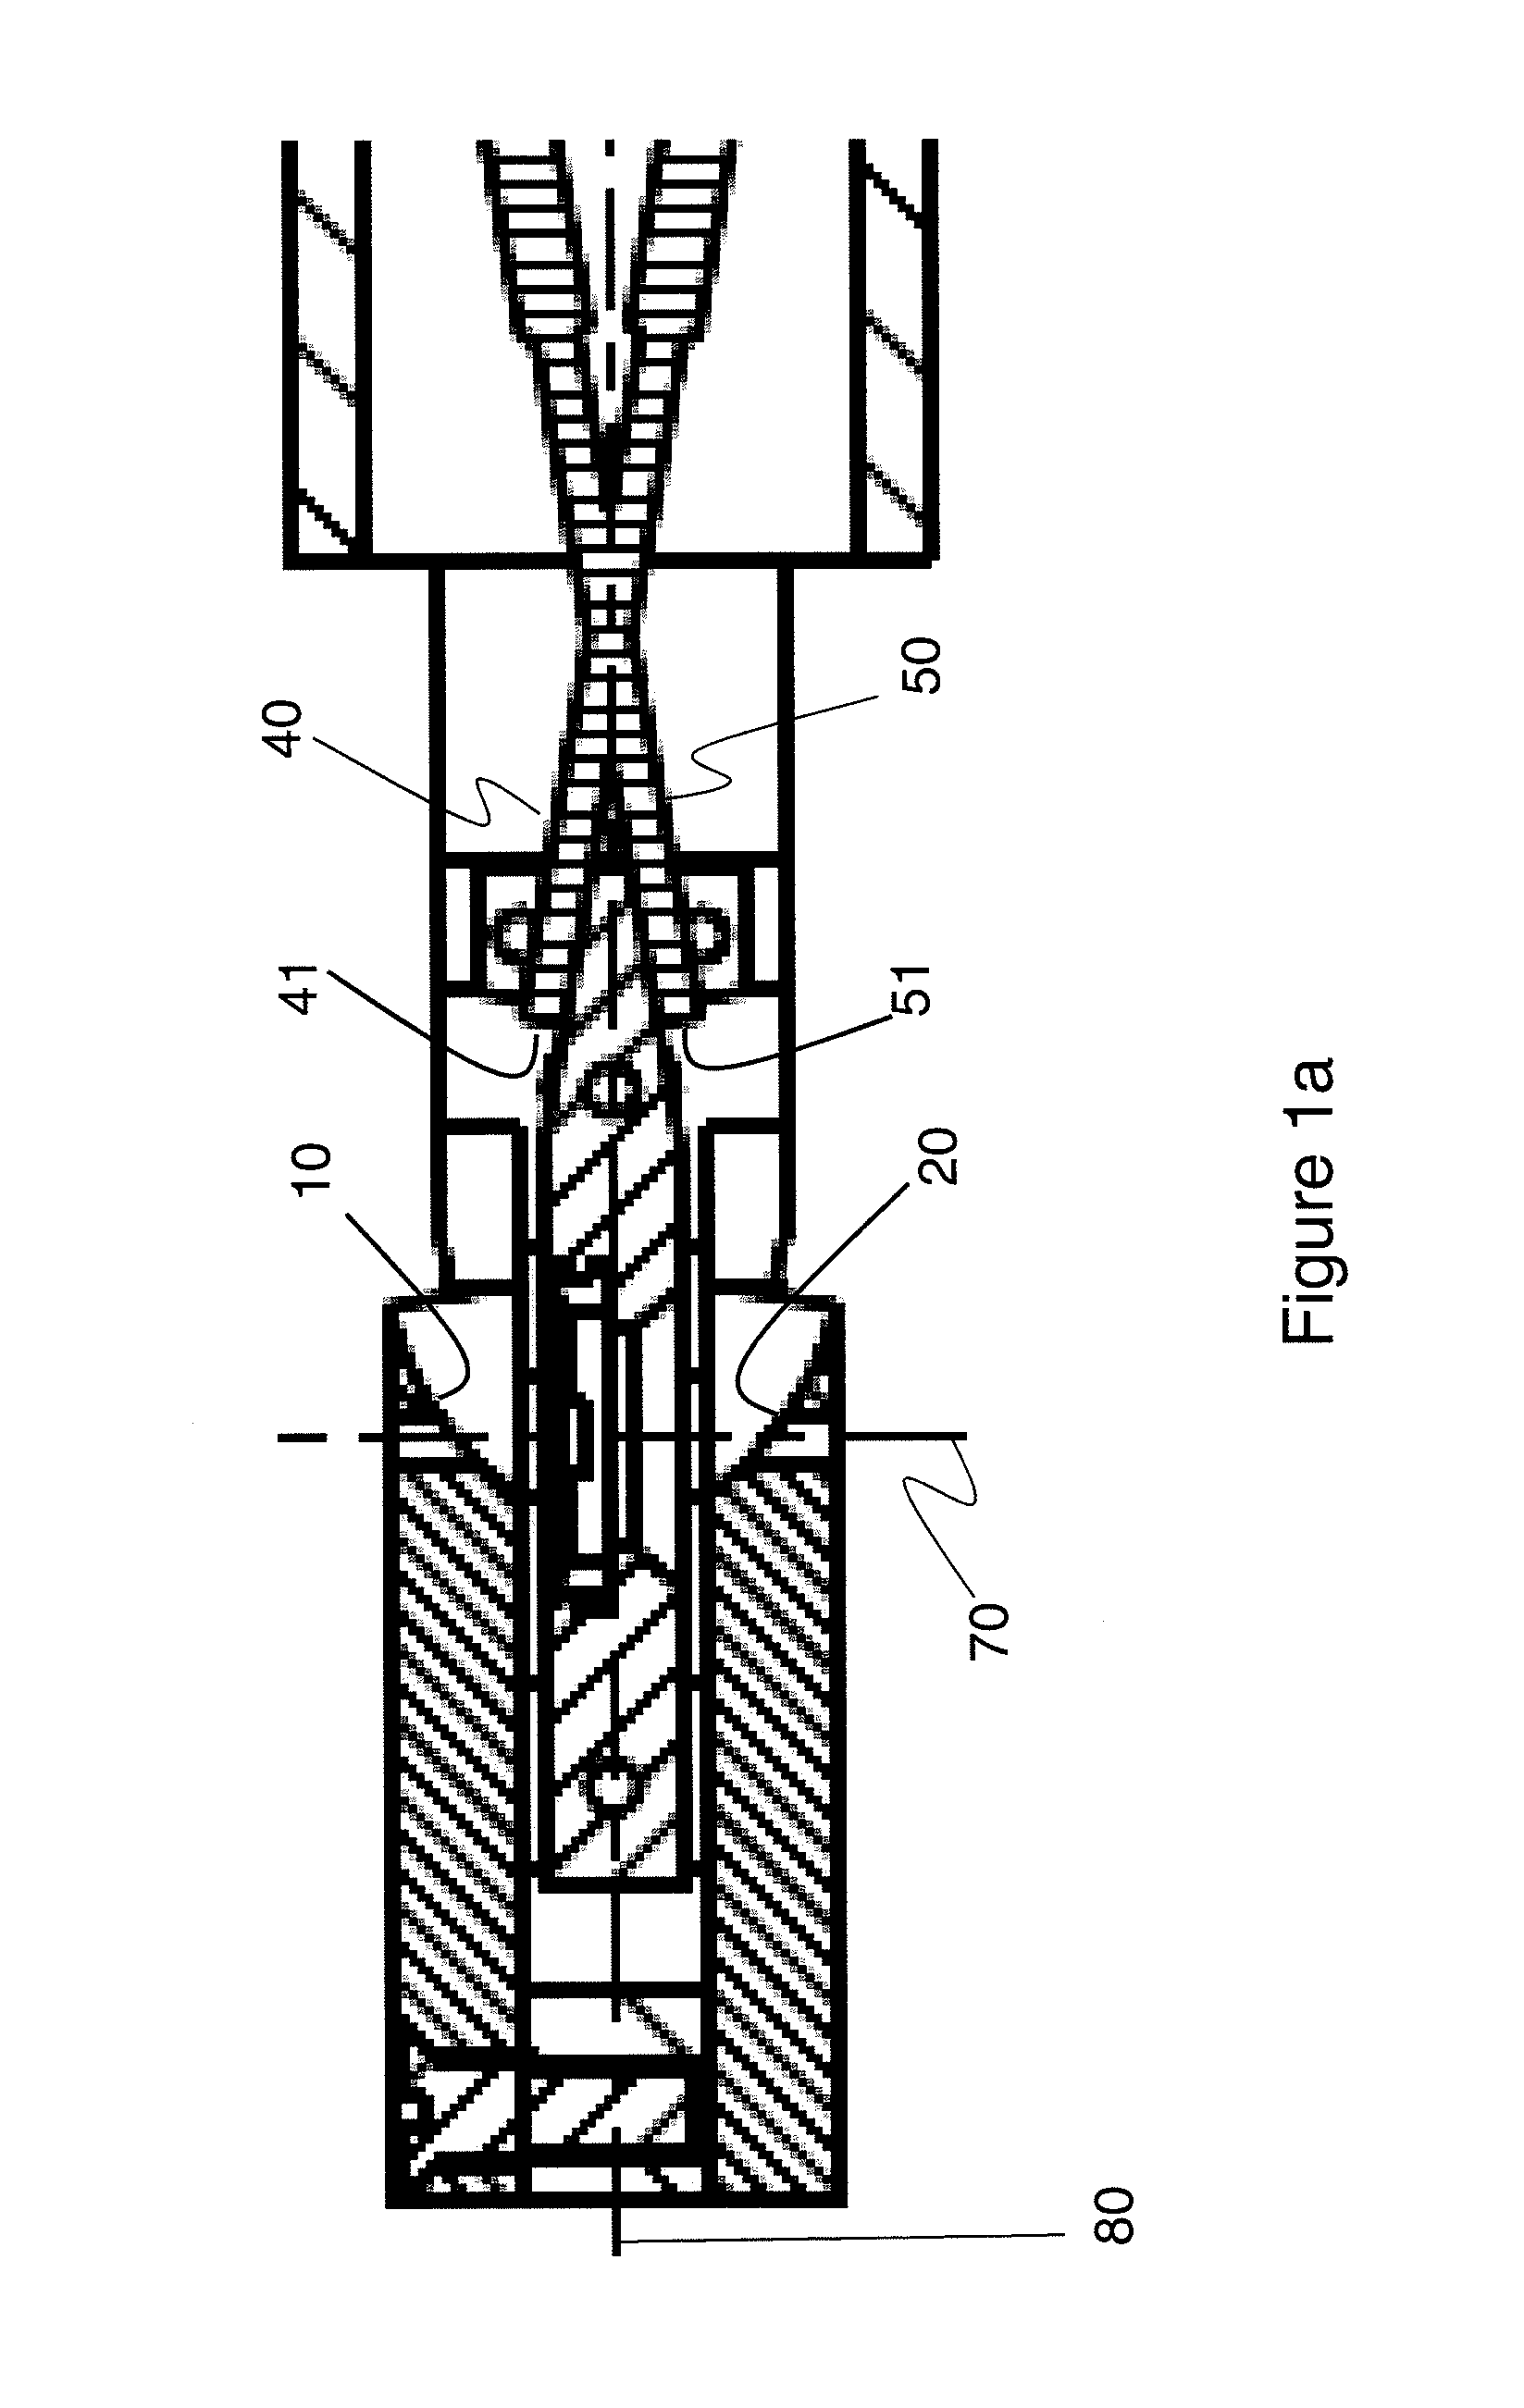 Apparatus for collection of cathodoluminescence signals